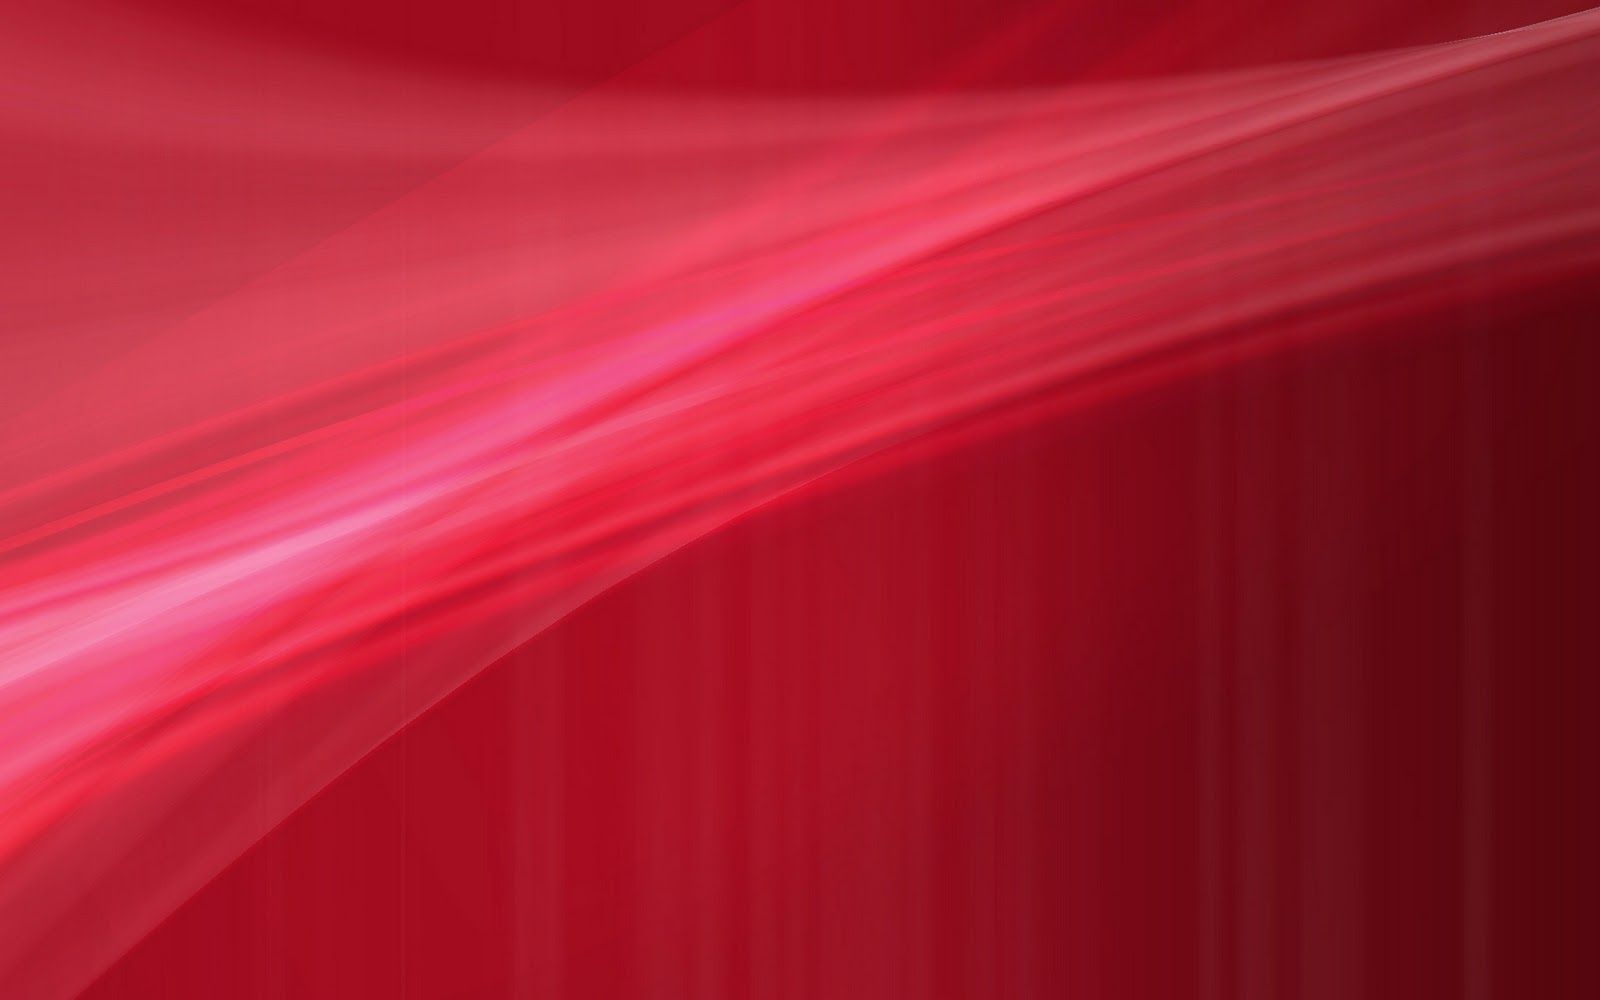 Red. The Best Top Desktop Red Wallpaper Red Wallpaper Red Background Hd 16. Red Wallpaper, Red Background Image, Abstract Wallpaper